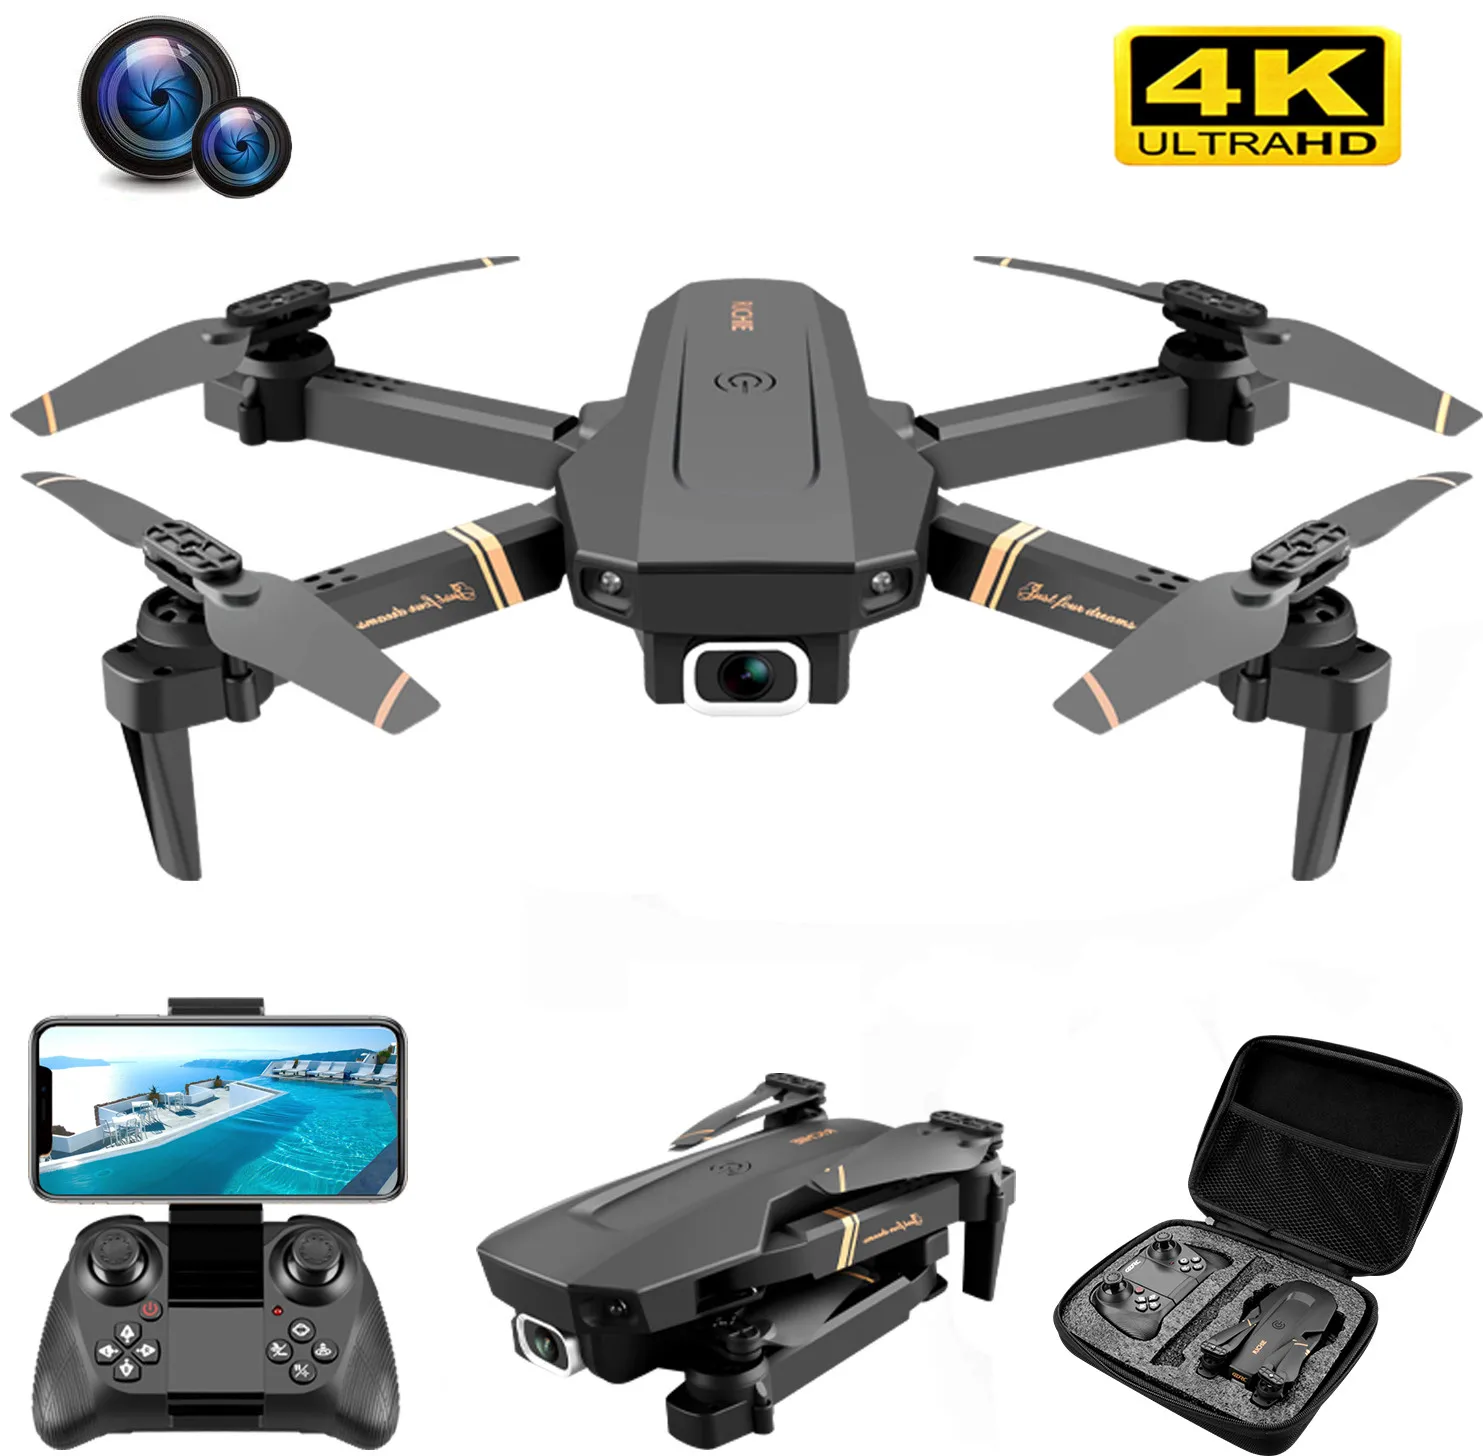 aliexpress.com - V4 Rc Drone 4k HD Wide Angle Camera 1080P WiFi fpv Drone Dual Camera Quadcopter Real-time transmission Helicopter Toys